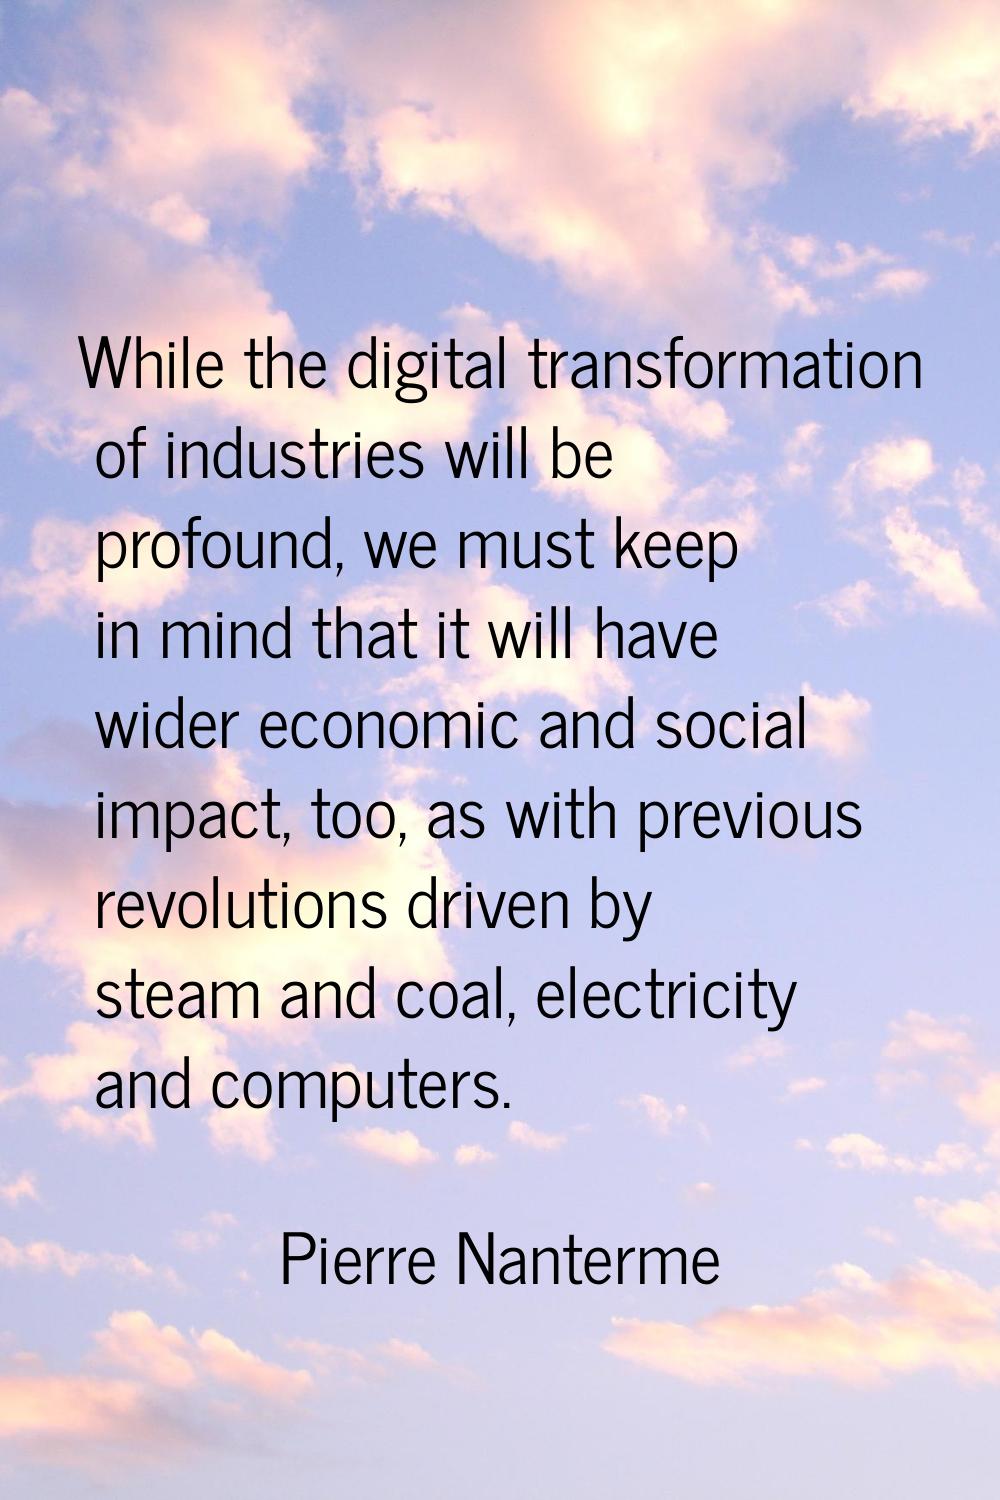 While the digital transformation of industries will be profound, we must keep in mind that it will 